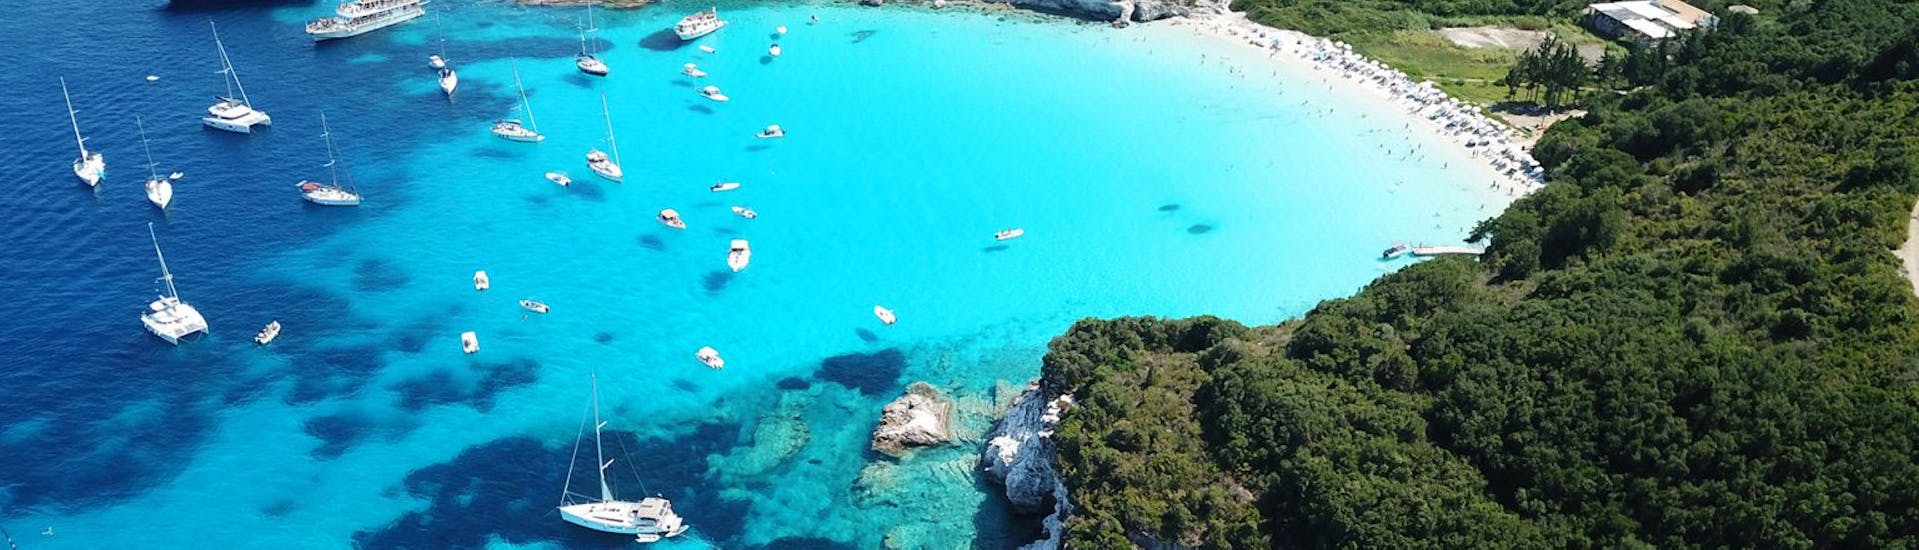 One of the places where you go during the Boat Trip to Paxos, Antipaxos and the Blue Caves with Captain Theo Corfu Cruises.